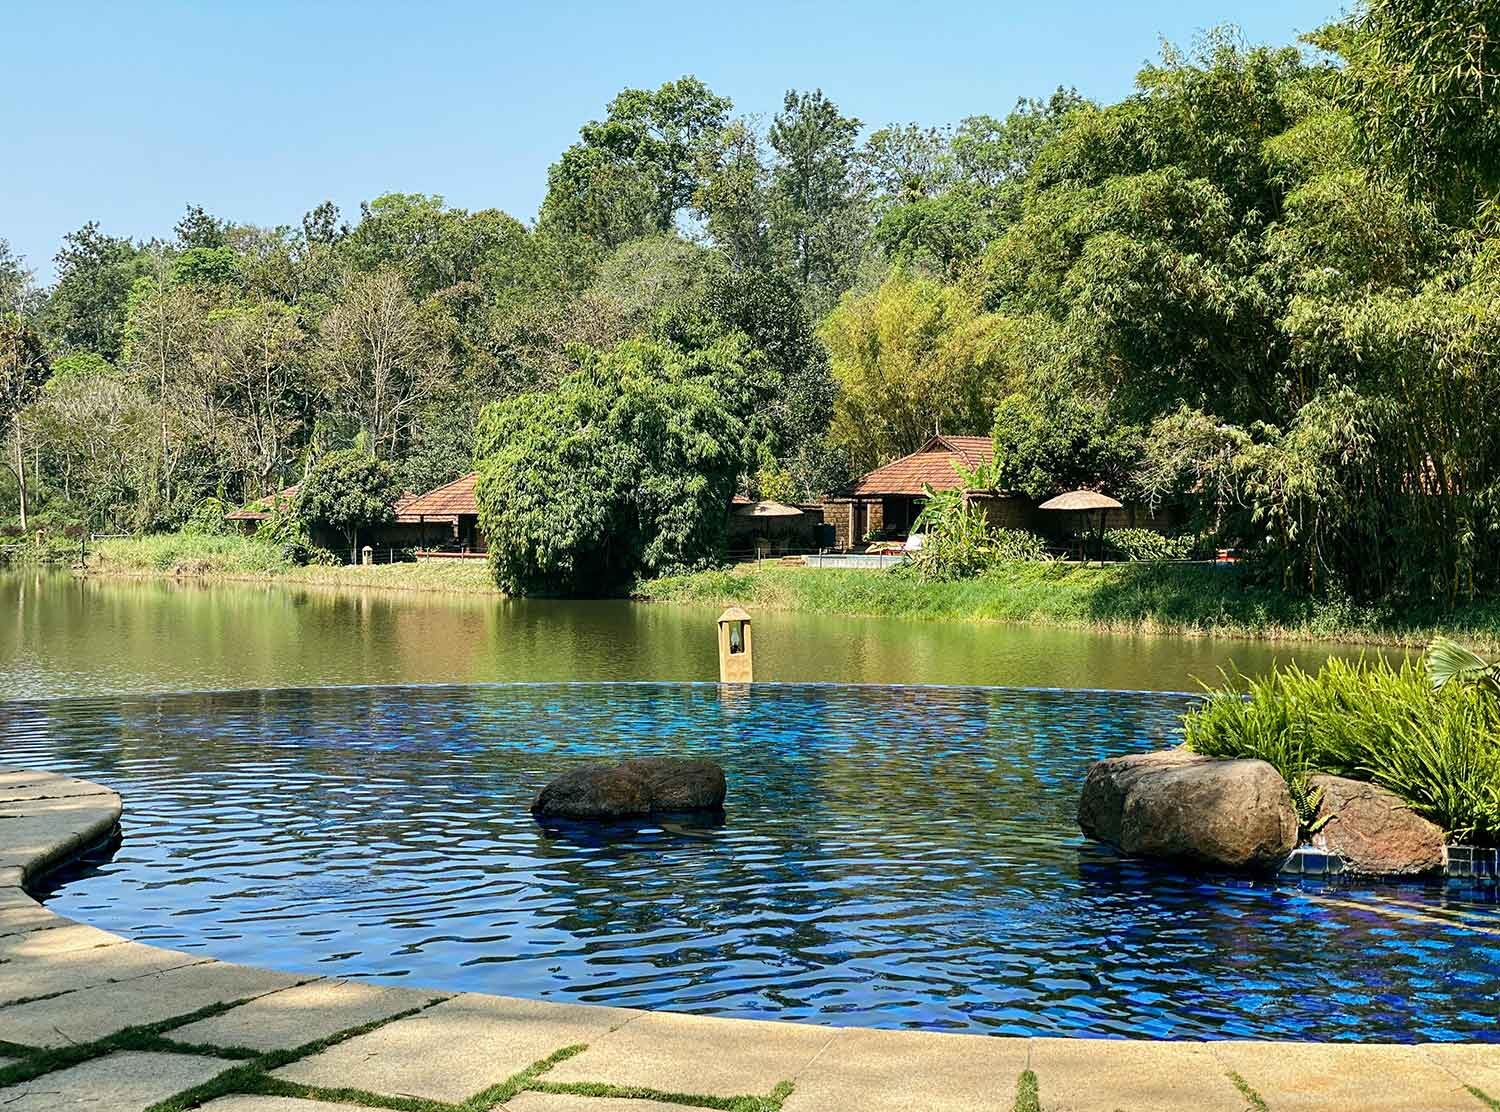 Evolve Back, Coorg The slightly hidden infinity pool overlooking the lake